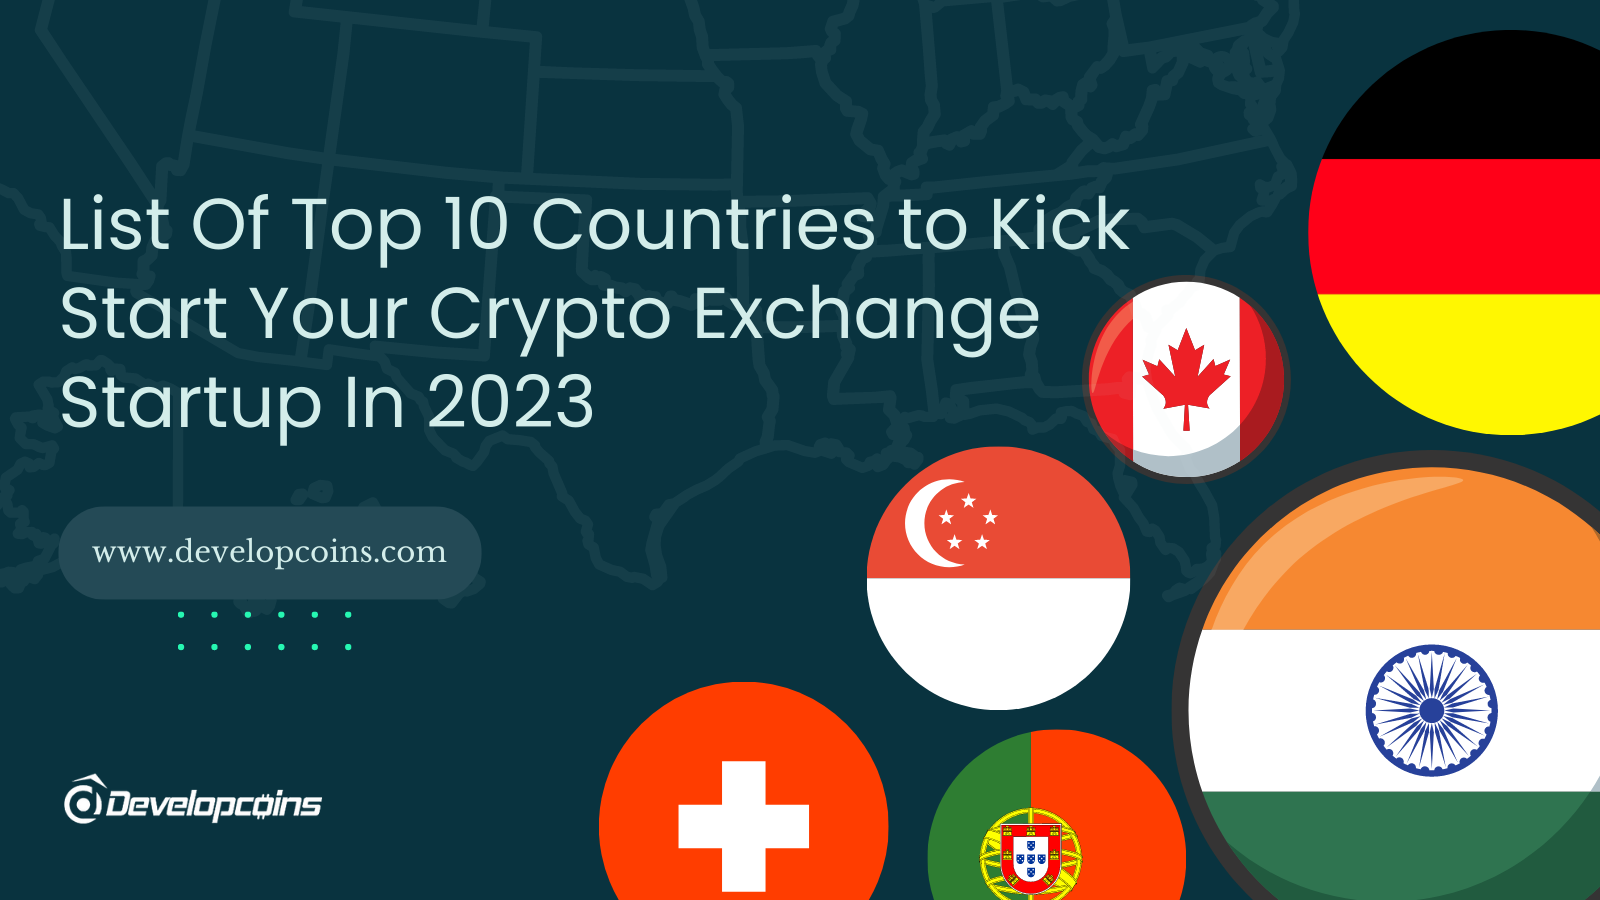 List Of Top 10 Countries to Kick Start Your Crypto Exchange Startup In 2023